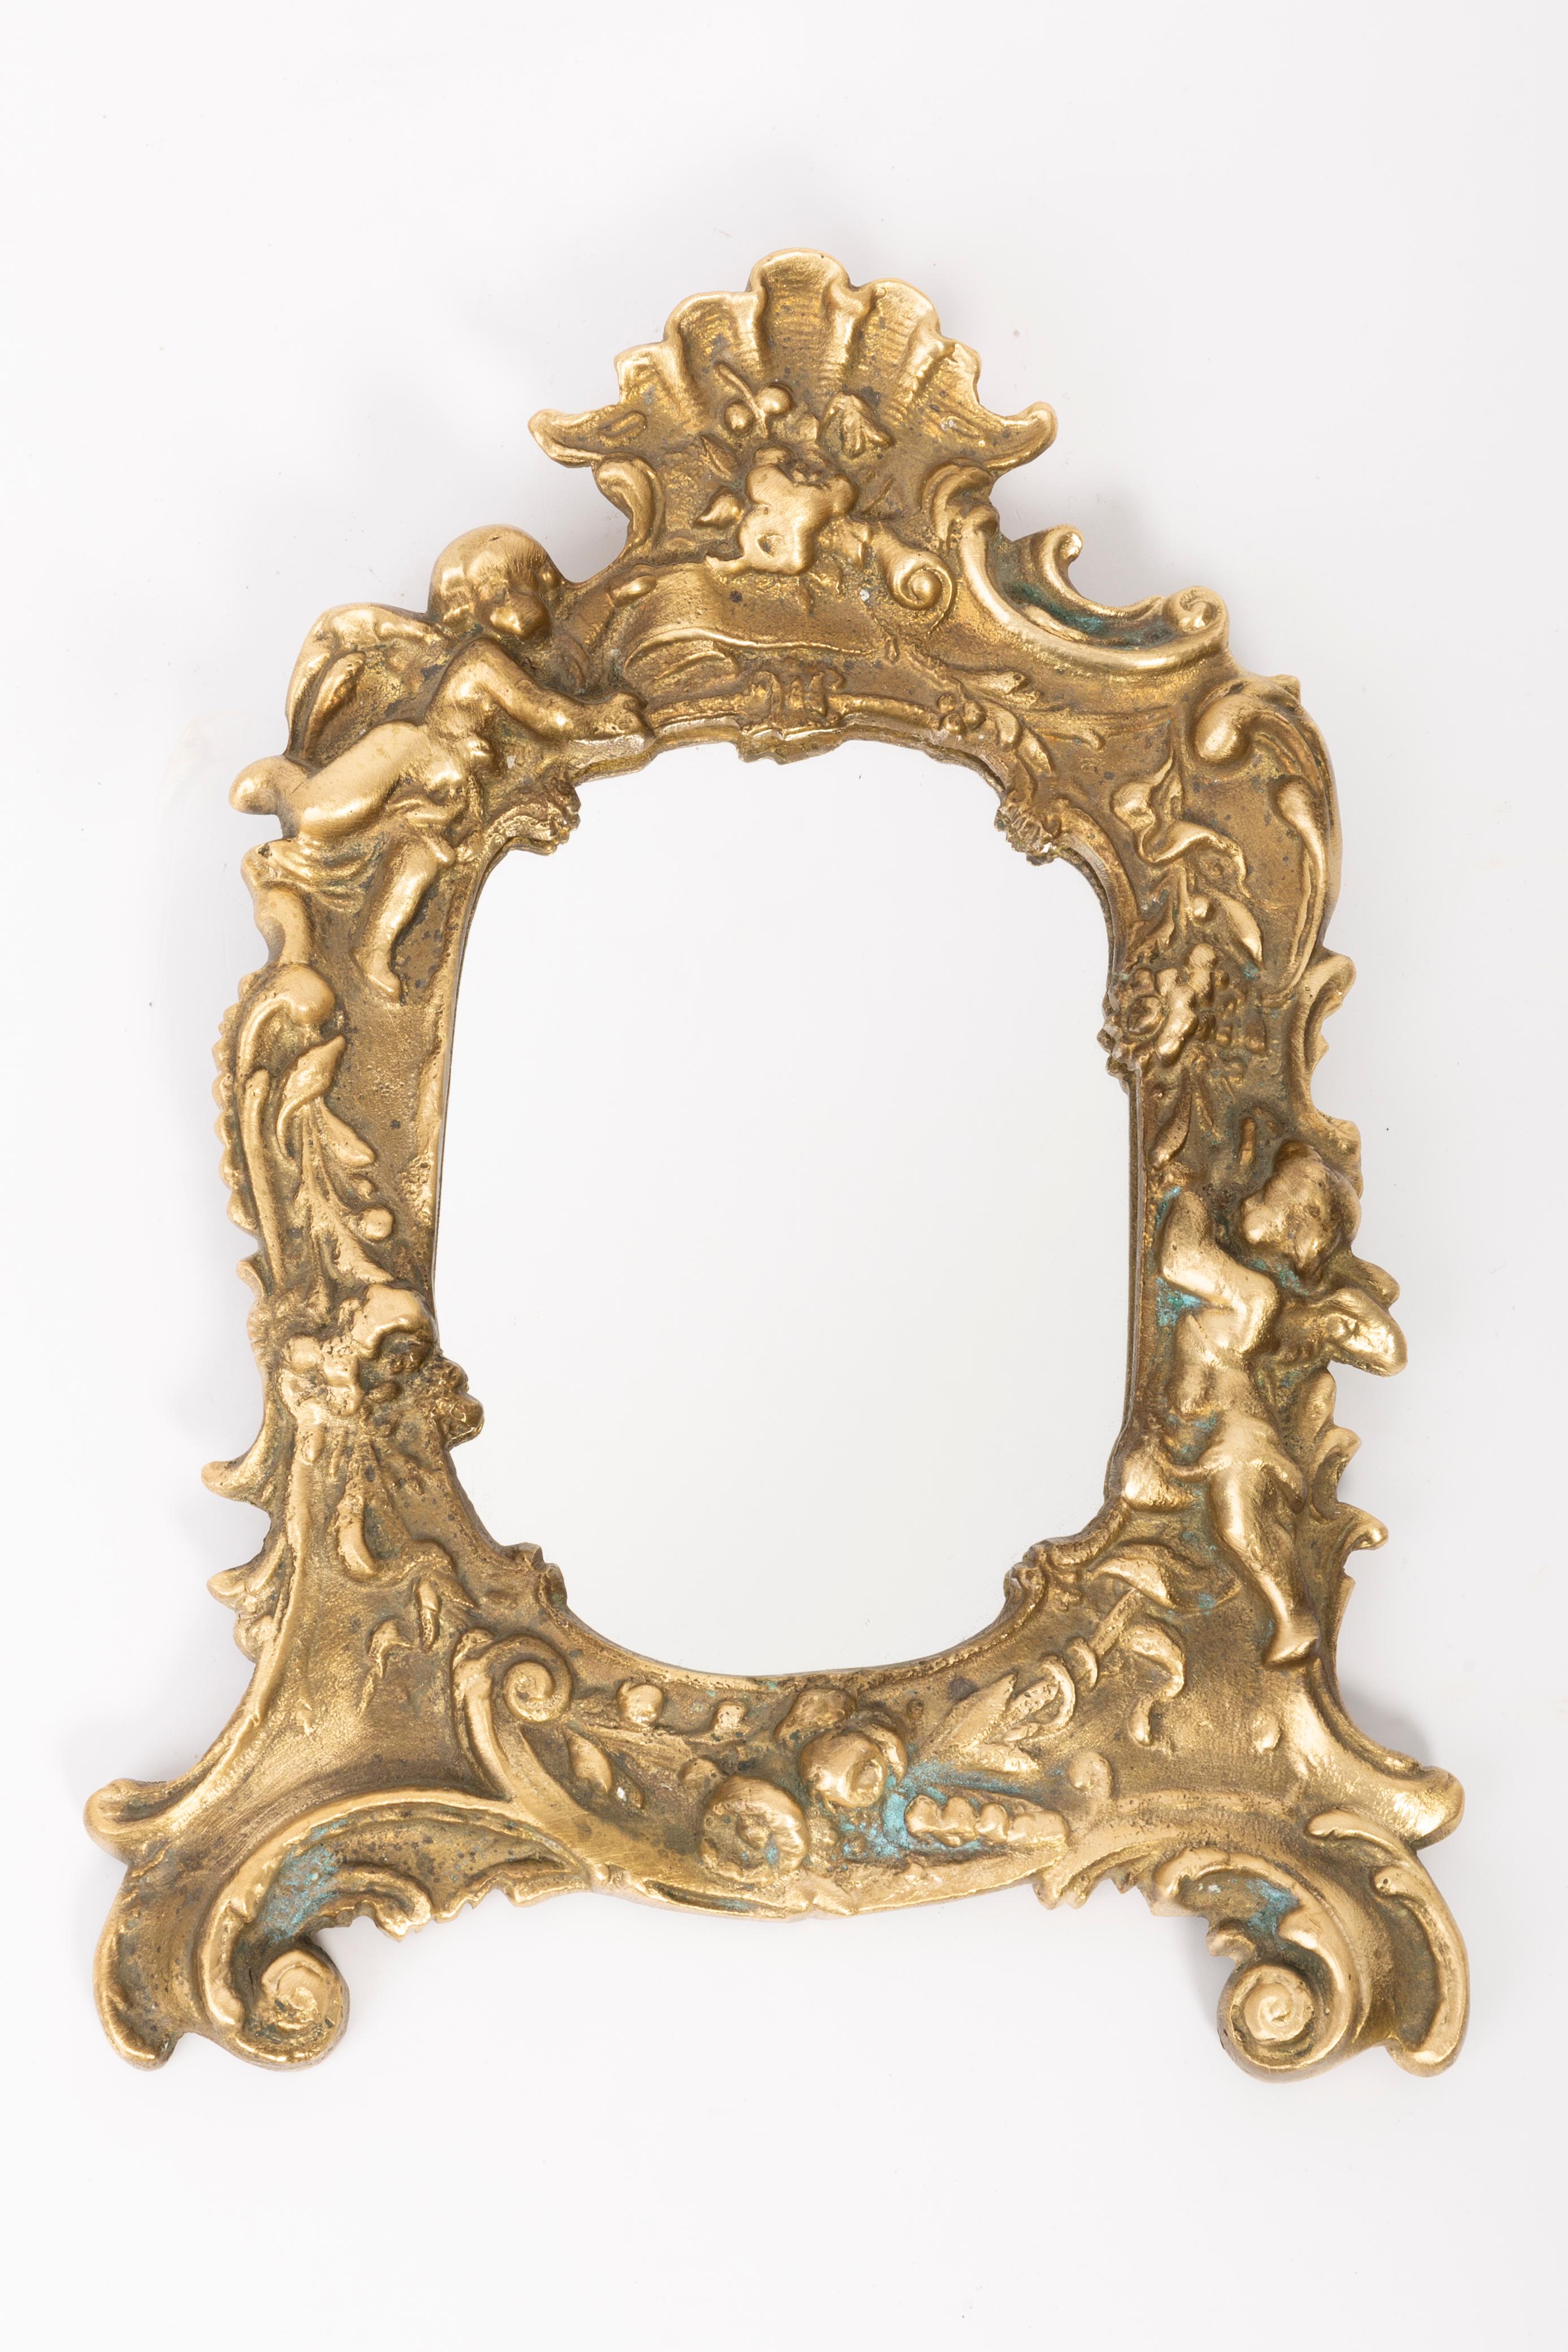 A mirror in a golden decorative frame from Italy. The frame is made of metal. Mirror is in very good vintage condition, no damage or cracks in the frame. Original glass. Beautiful piece for every interior! Only one unique piece.